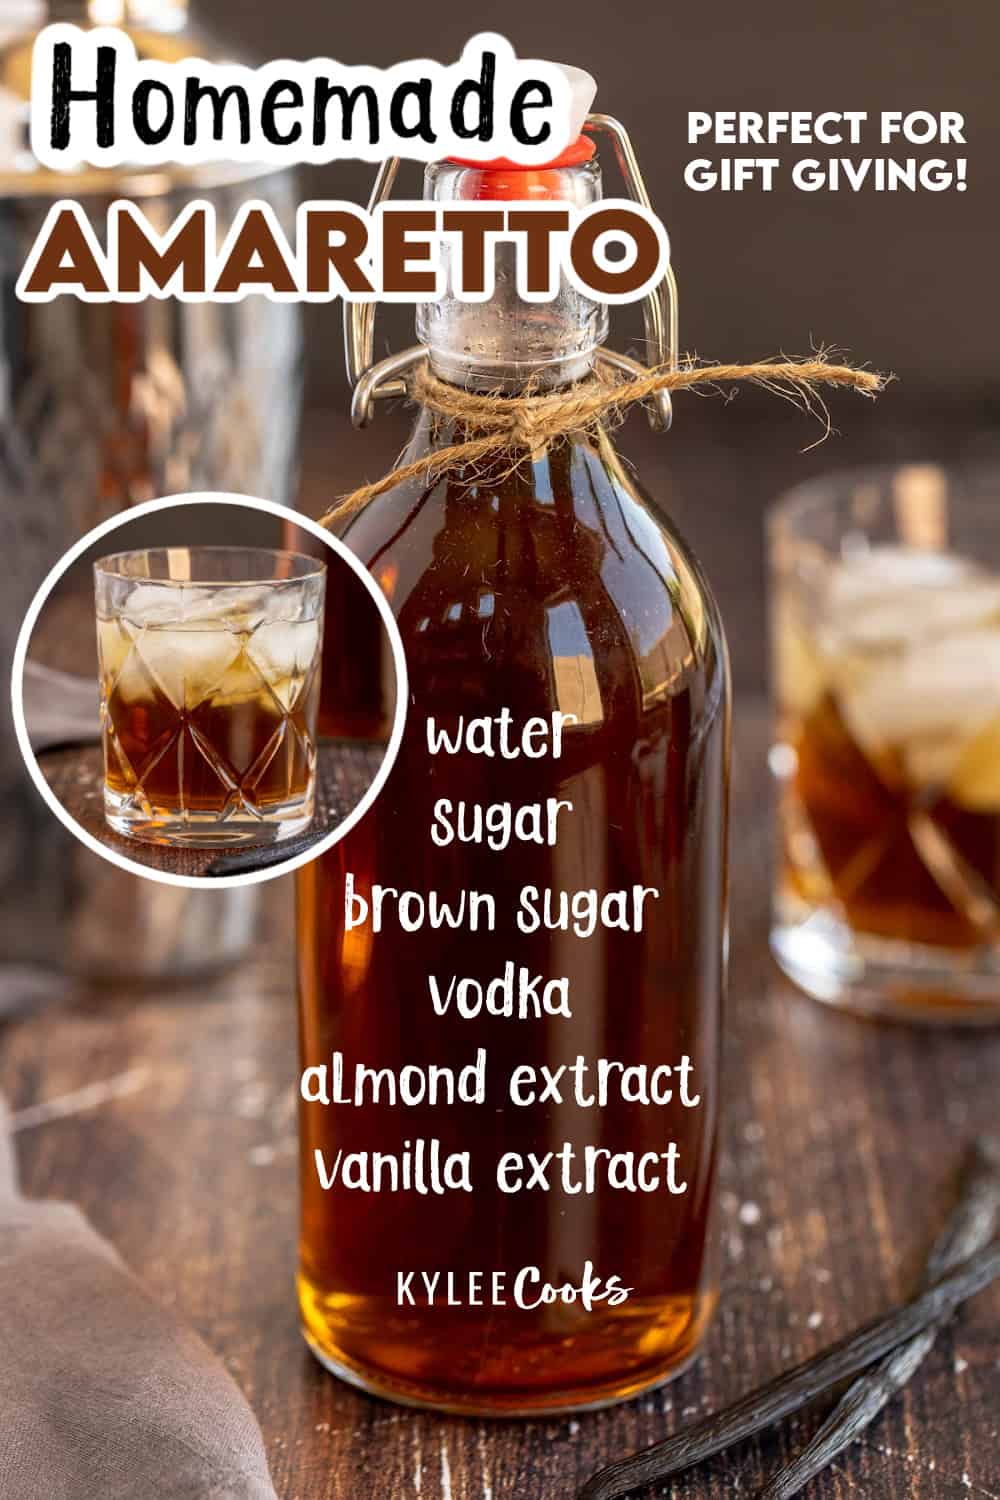 a bottle of homemade amaretto with ingredients overlaid in text.